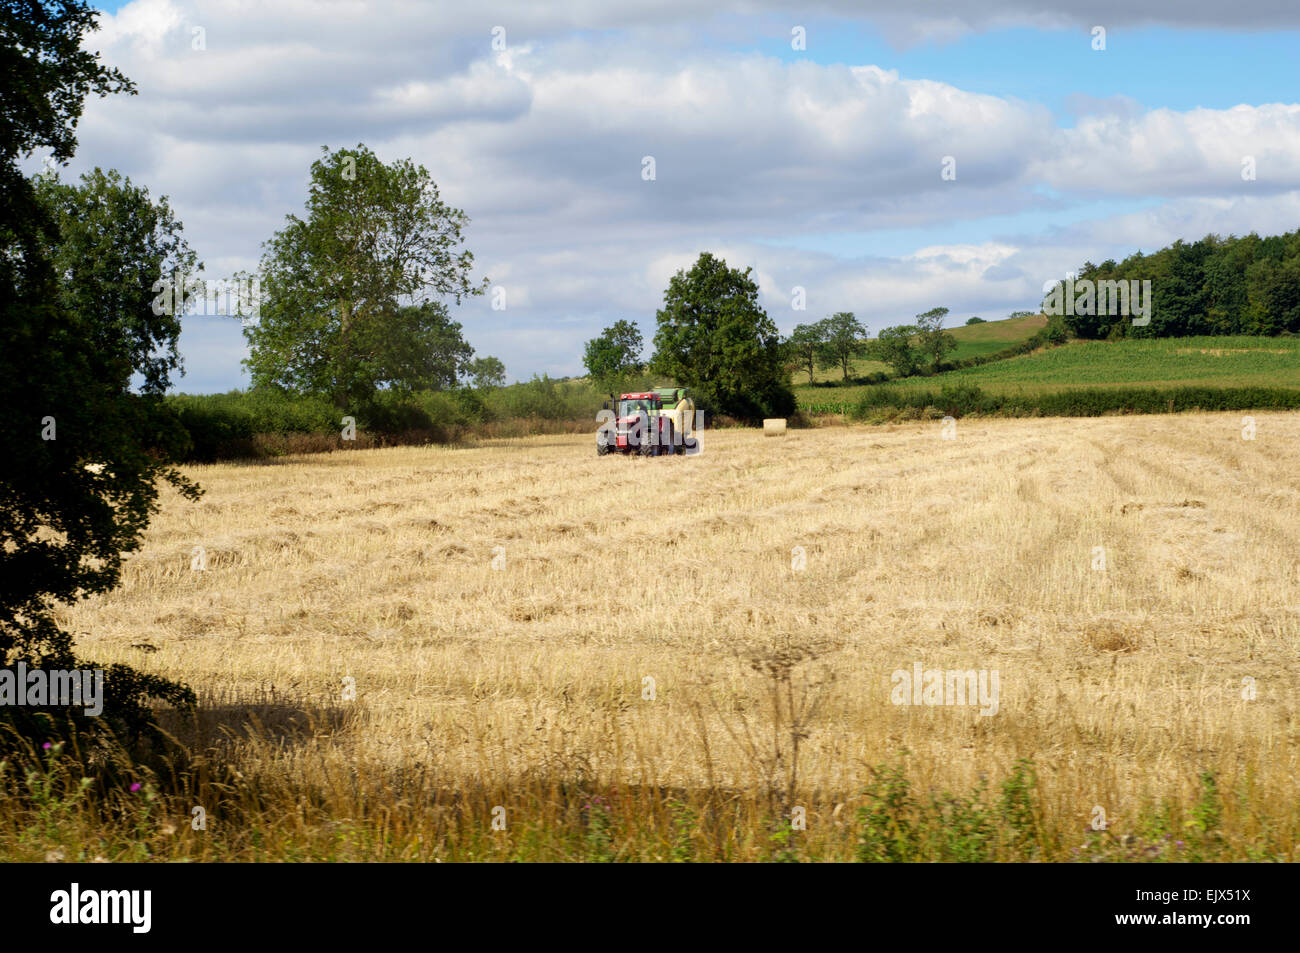 Tractor in a field in the United Kingdom collecting rolls of hay. Stock Photo